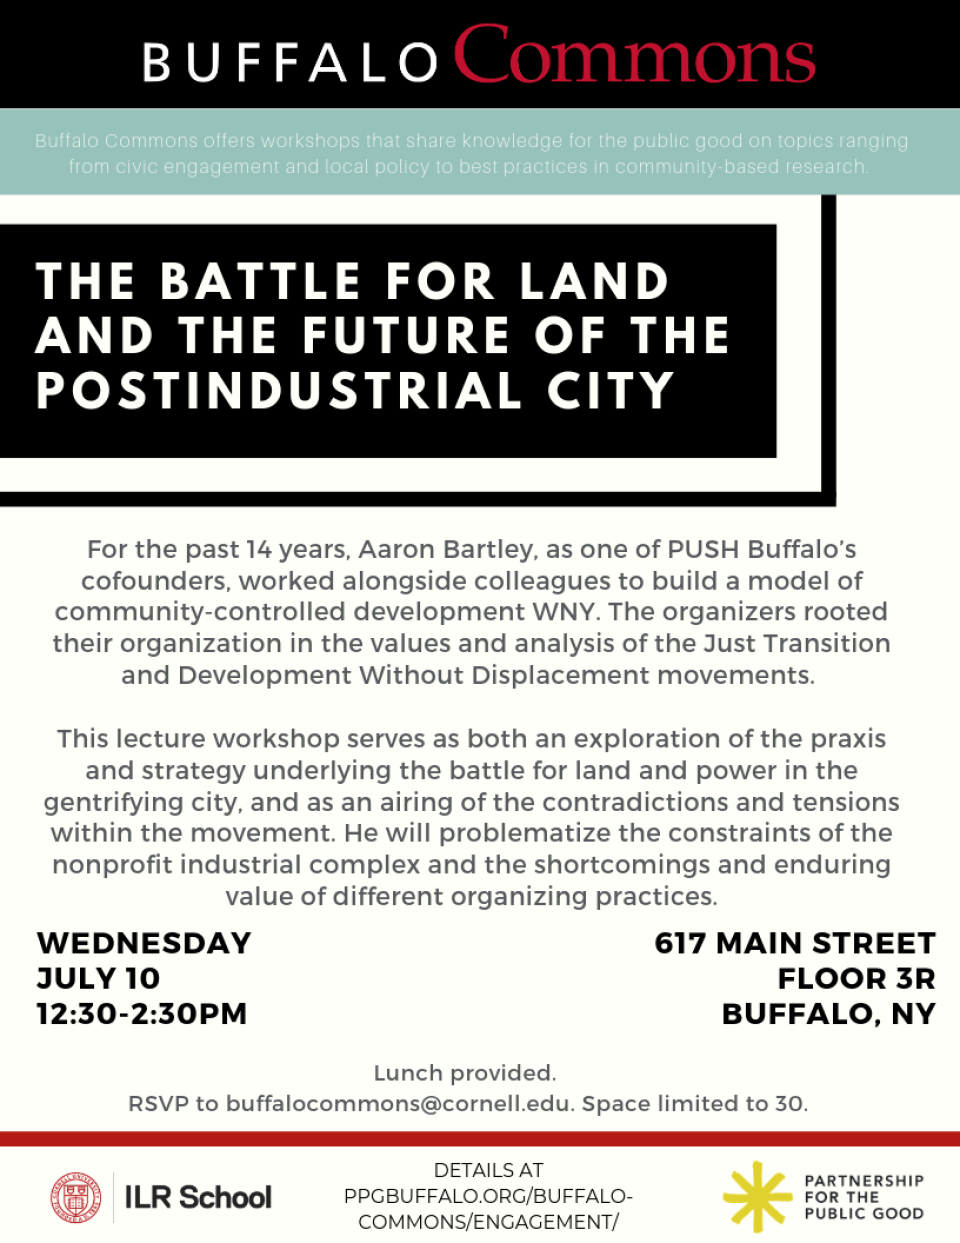 The Battle for Land and the Future of the Postindustrial City